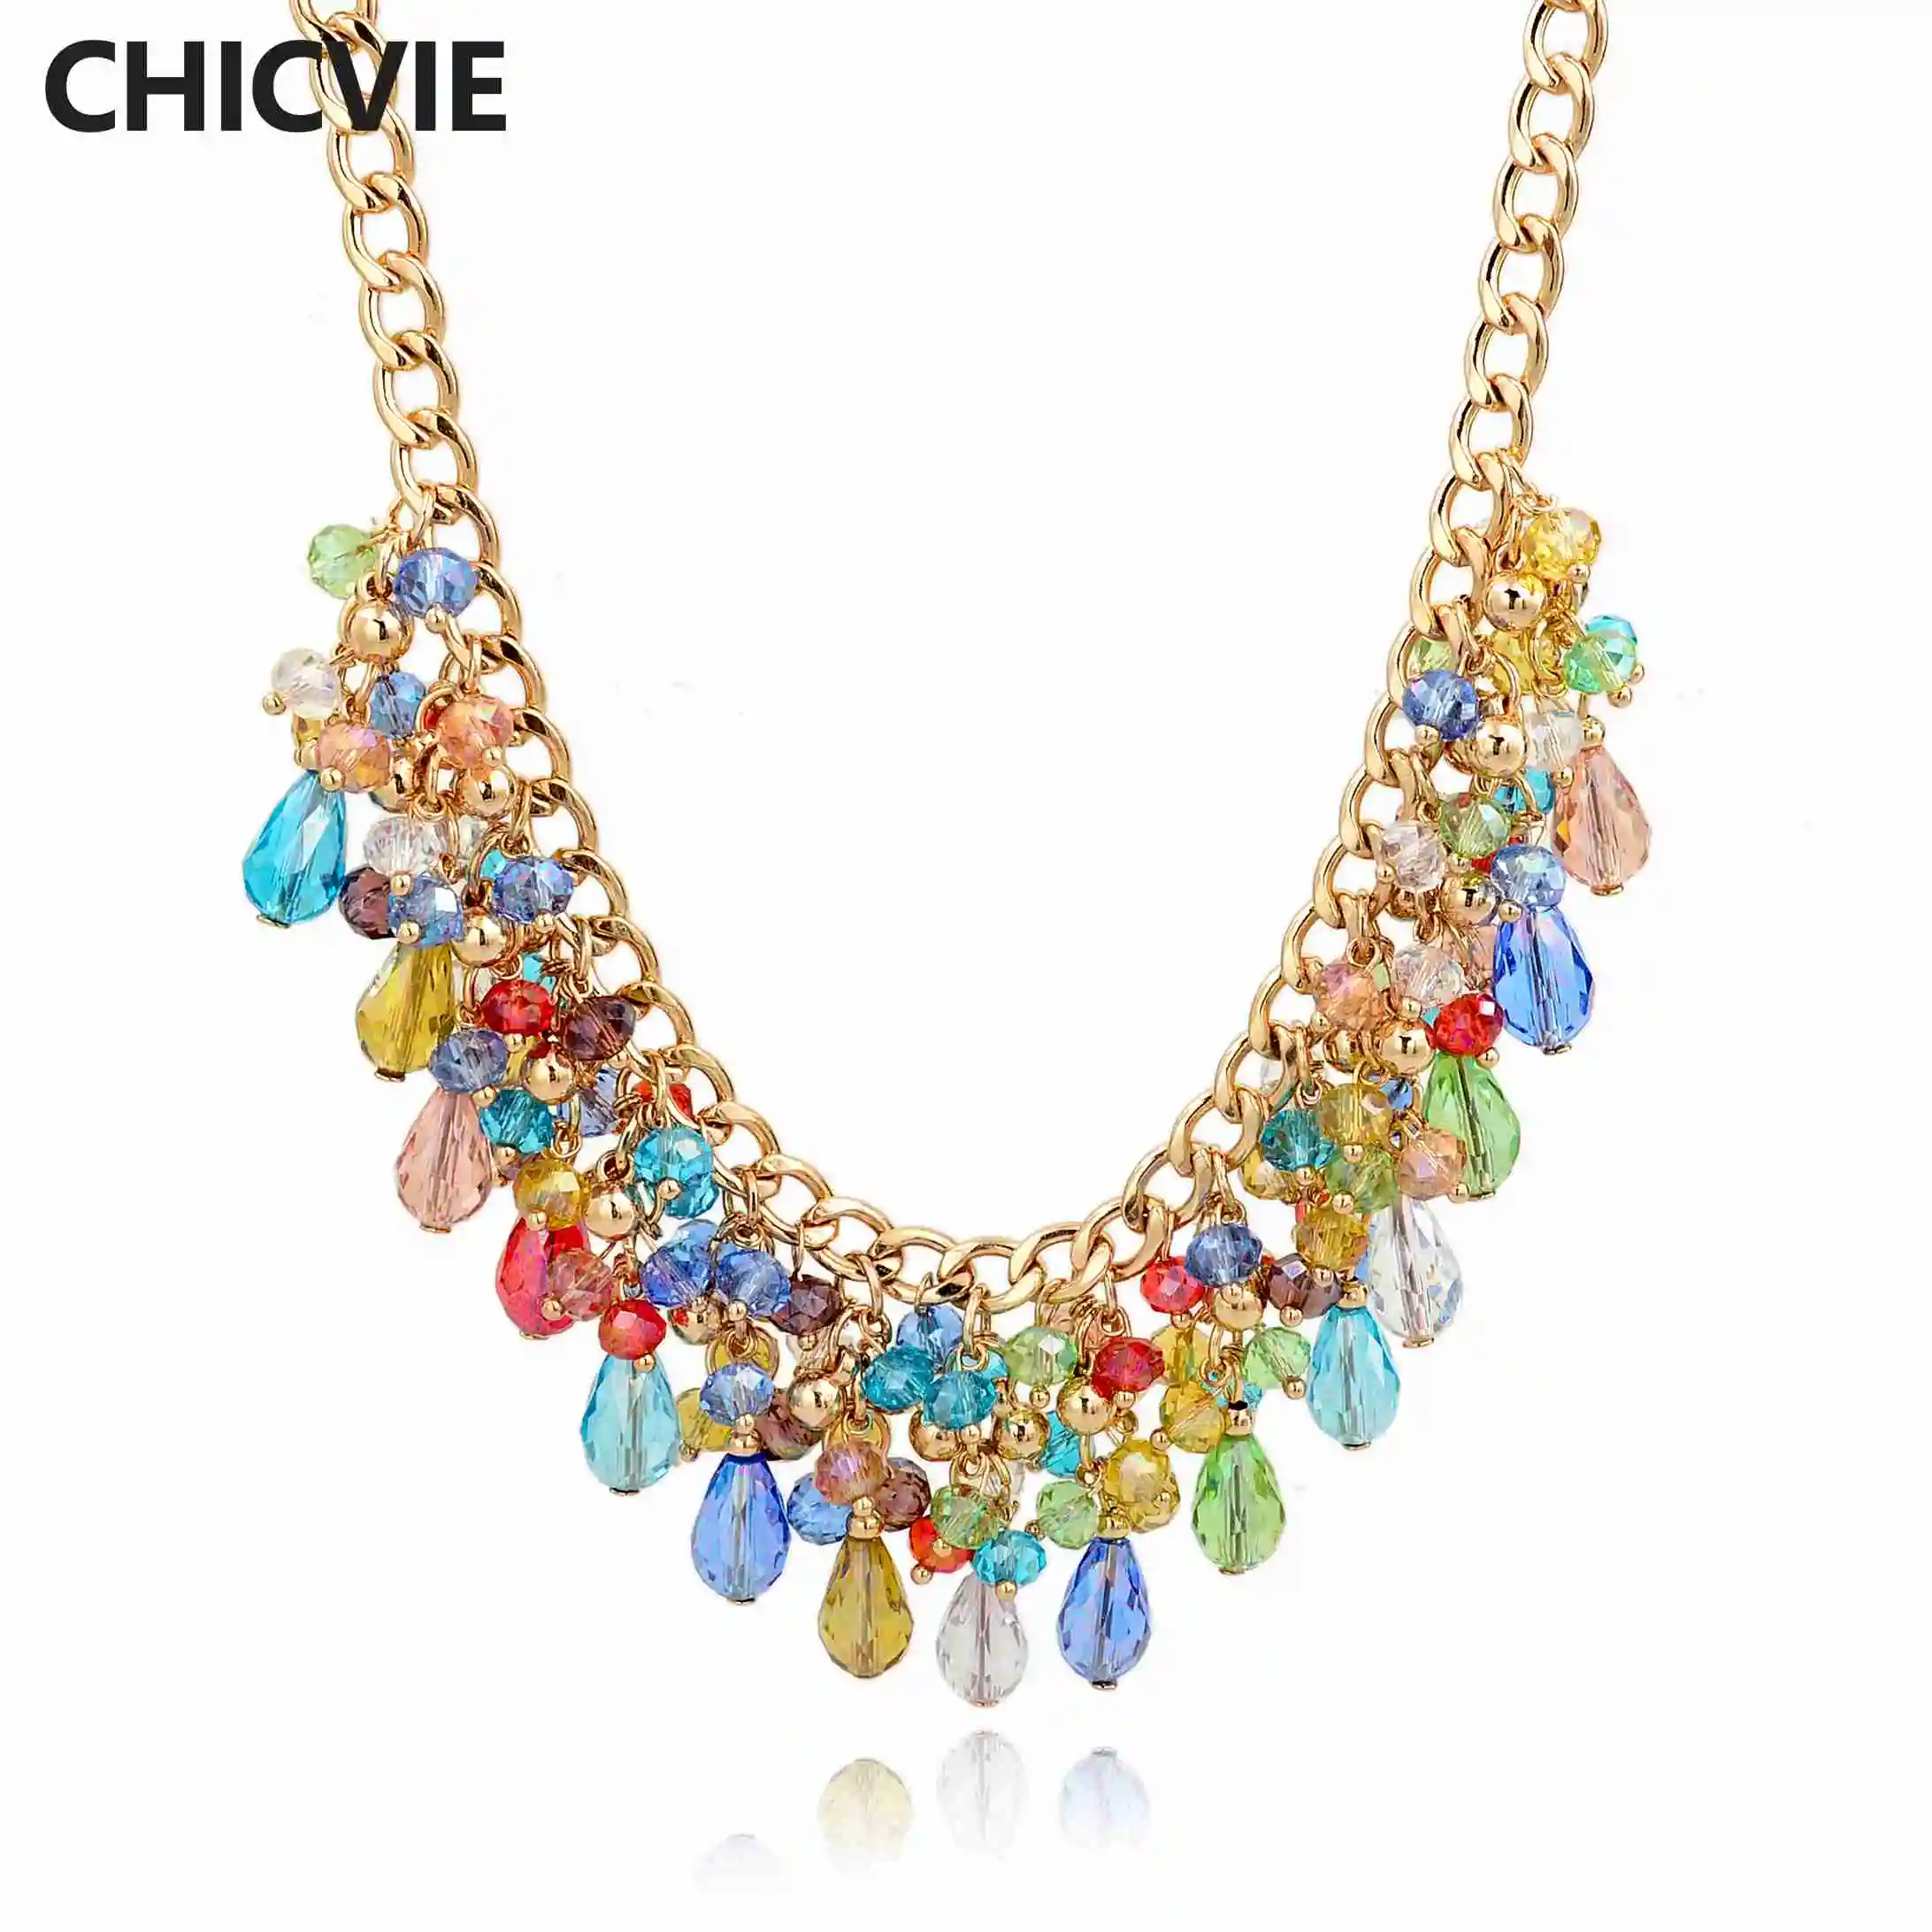 

CHICVIE Bohemian Statement Big Chunky Choker Necklace For Women Gold Color Red Crystal Ethnic Jewelry femme Maxi Bijouterie